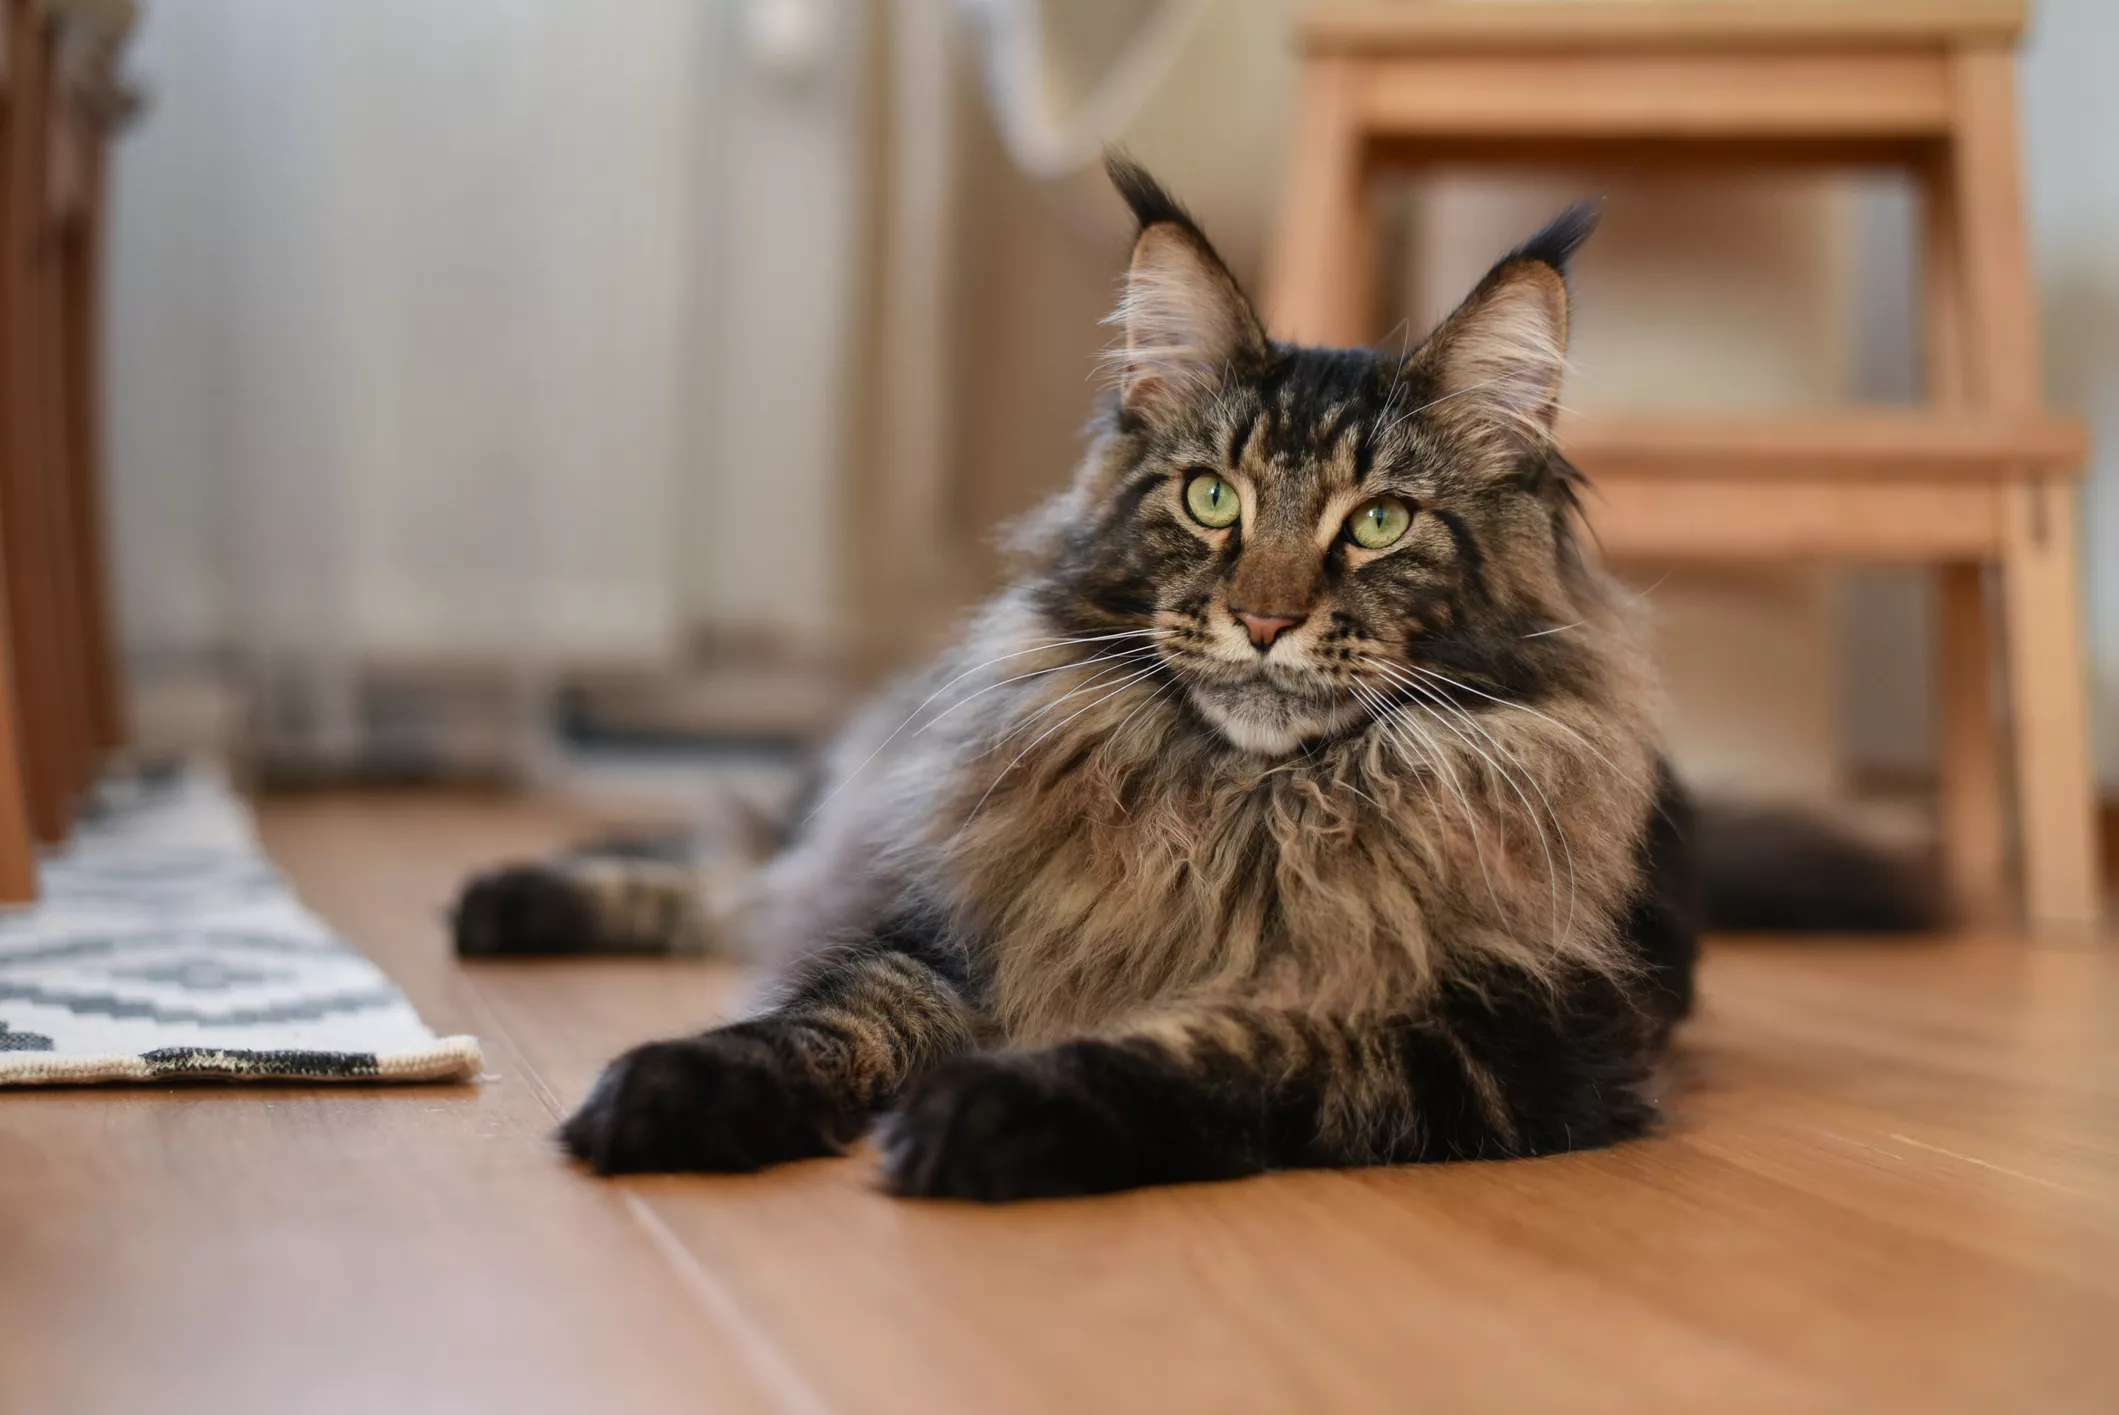 Maine coon cat with paws out, lying on floor